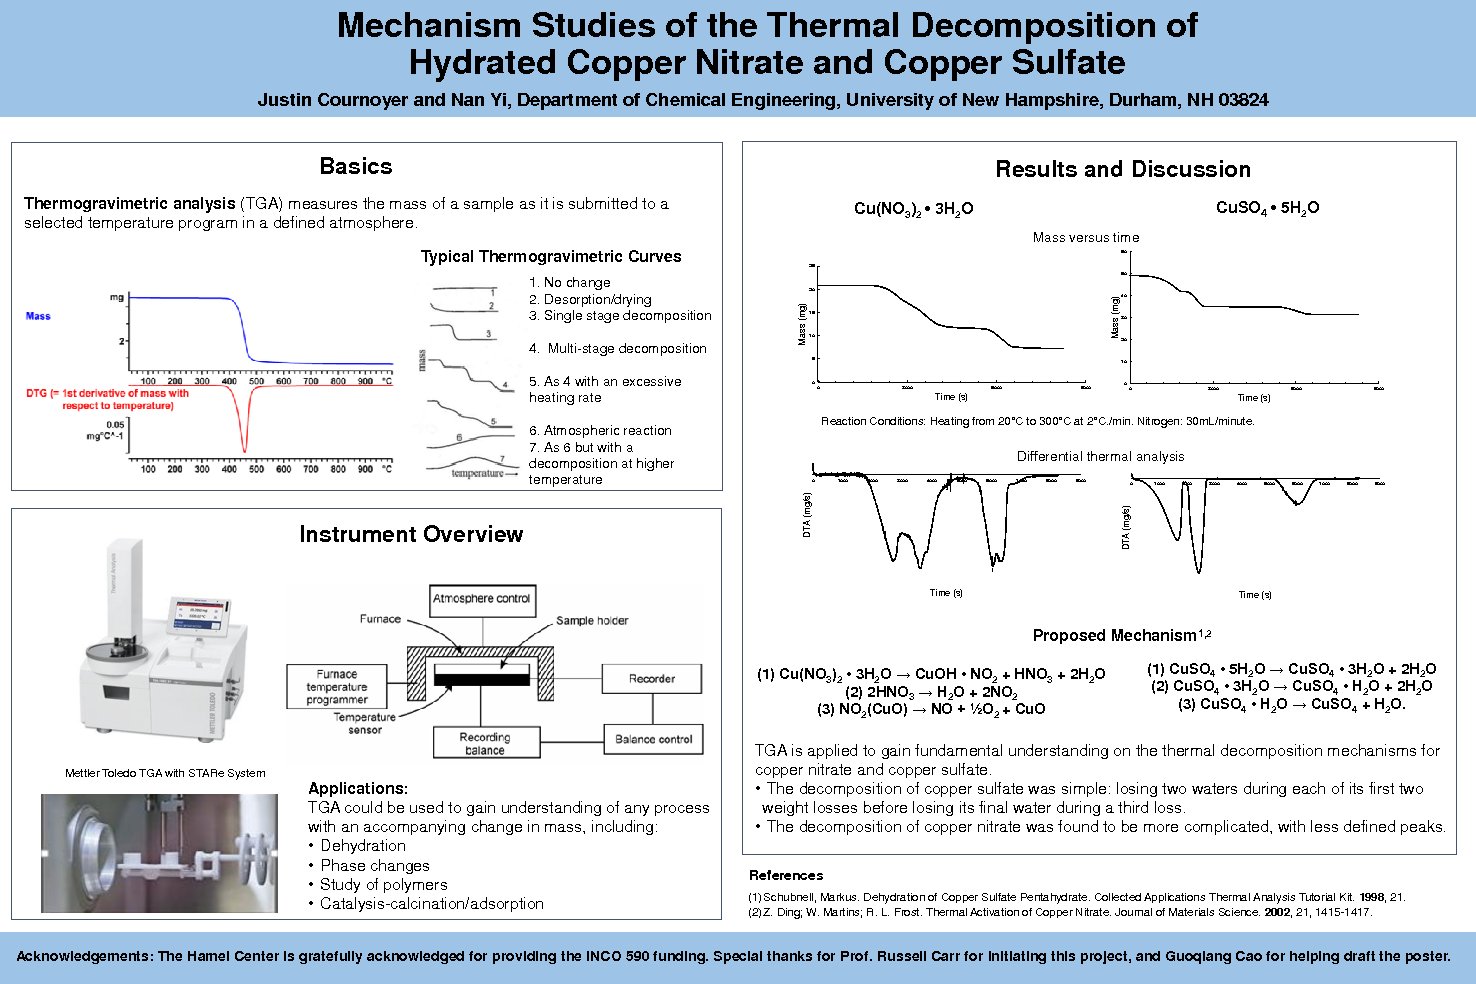 Mechanism Studies Of The Thermal Decomposition Of Hydrated Copper Sulfate And Copper Nitrate by jtc10